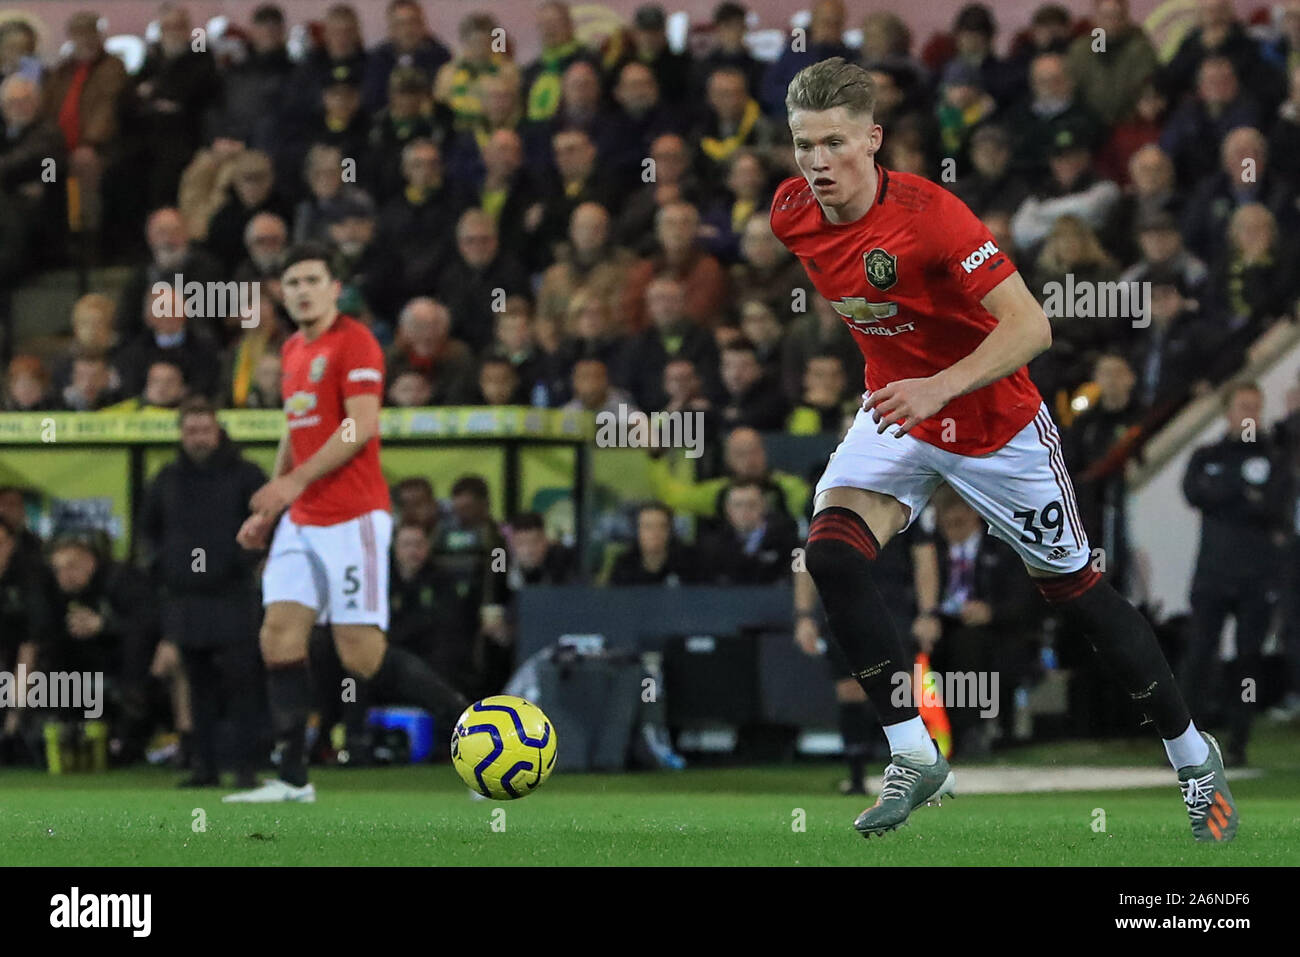 27th October 2019, Carrow Road, Norwich, England; Premier League, Norwich City v Manchester United :Scott McTominay (39) of Manchester United in action during the game  Credit: Mark Cosgrove/News Images Stock Photo